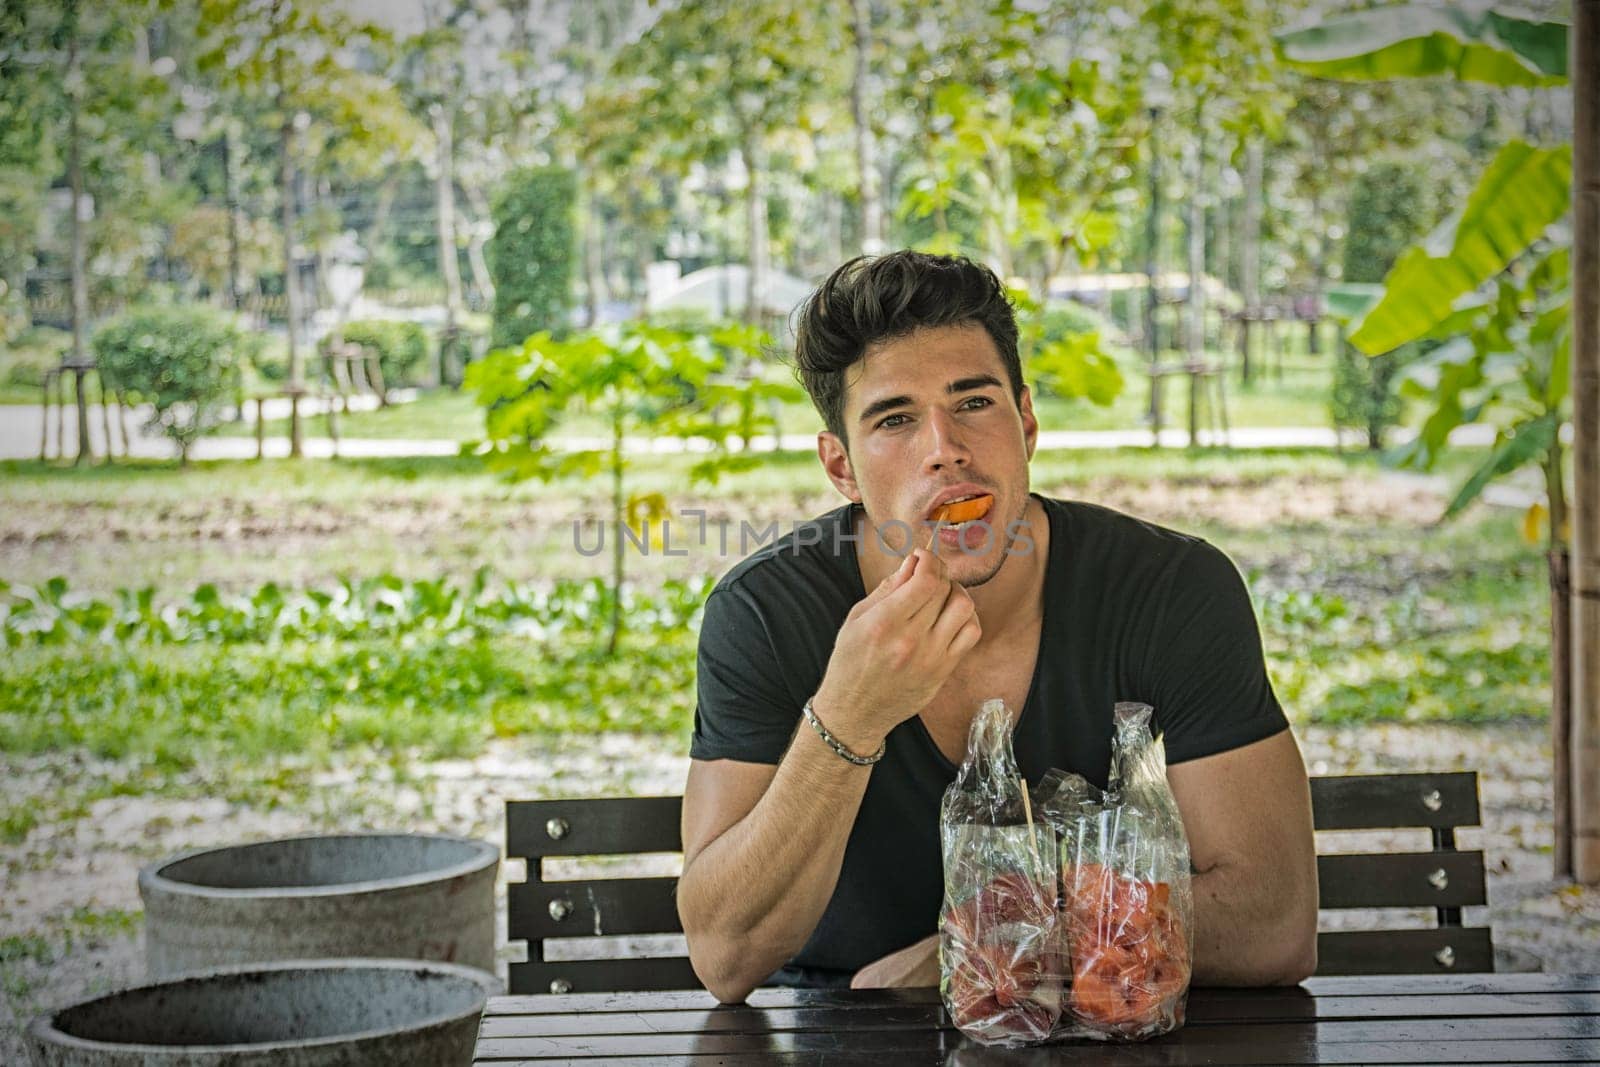 A man sitting at a table eating food, having dried fruits